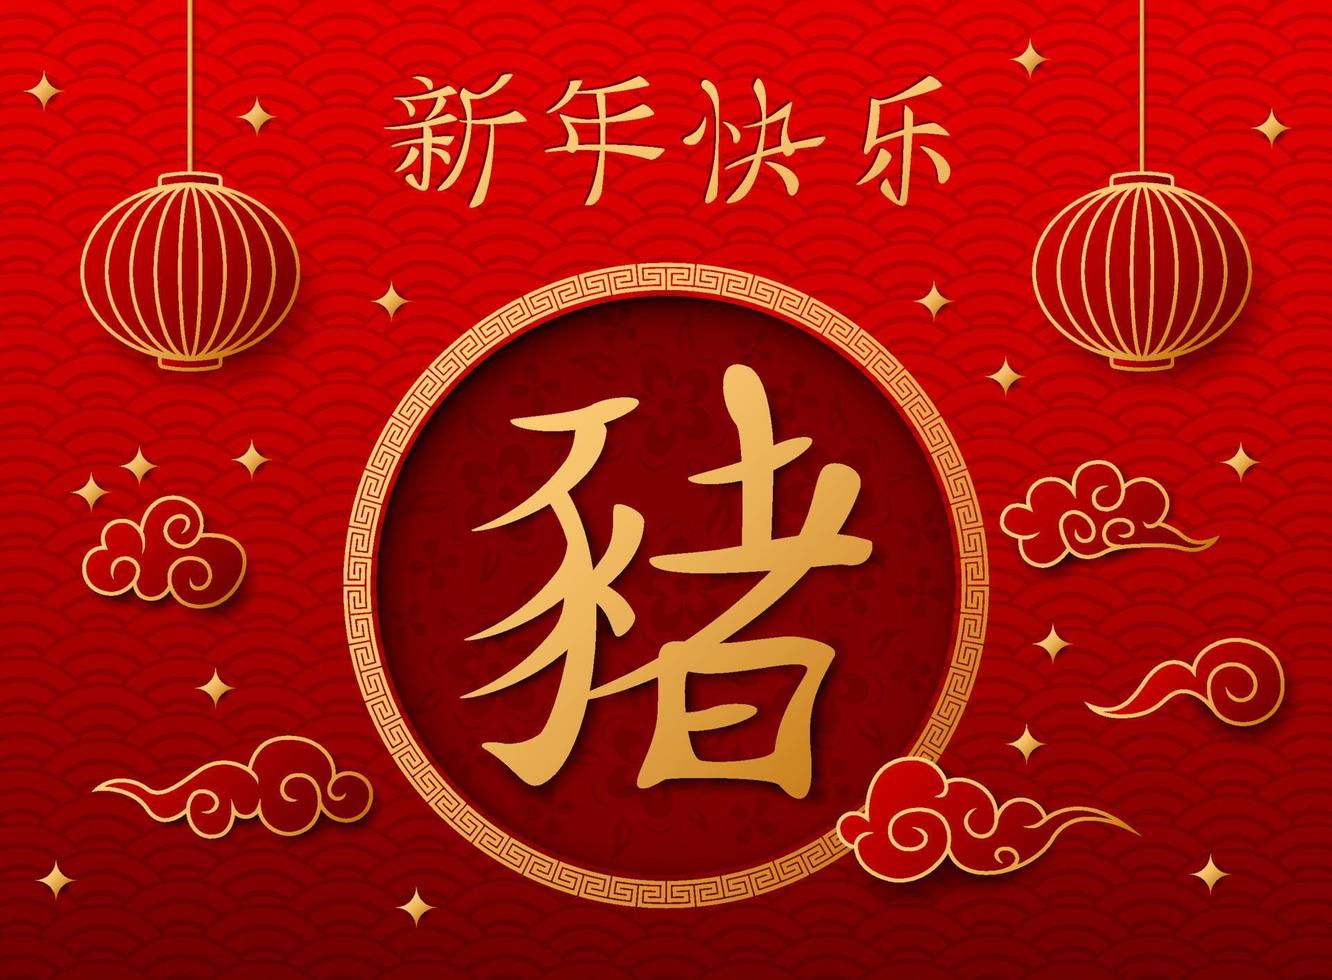 Chinese New Year with Chinese lanterns hanging vector